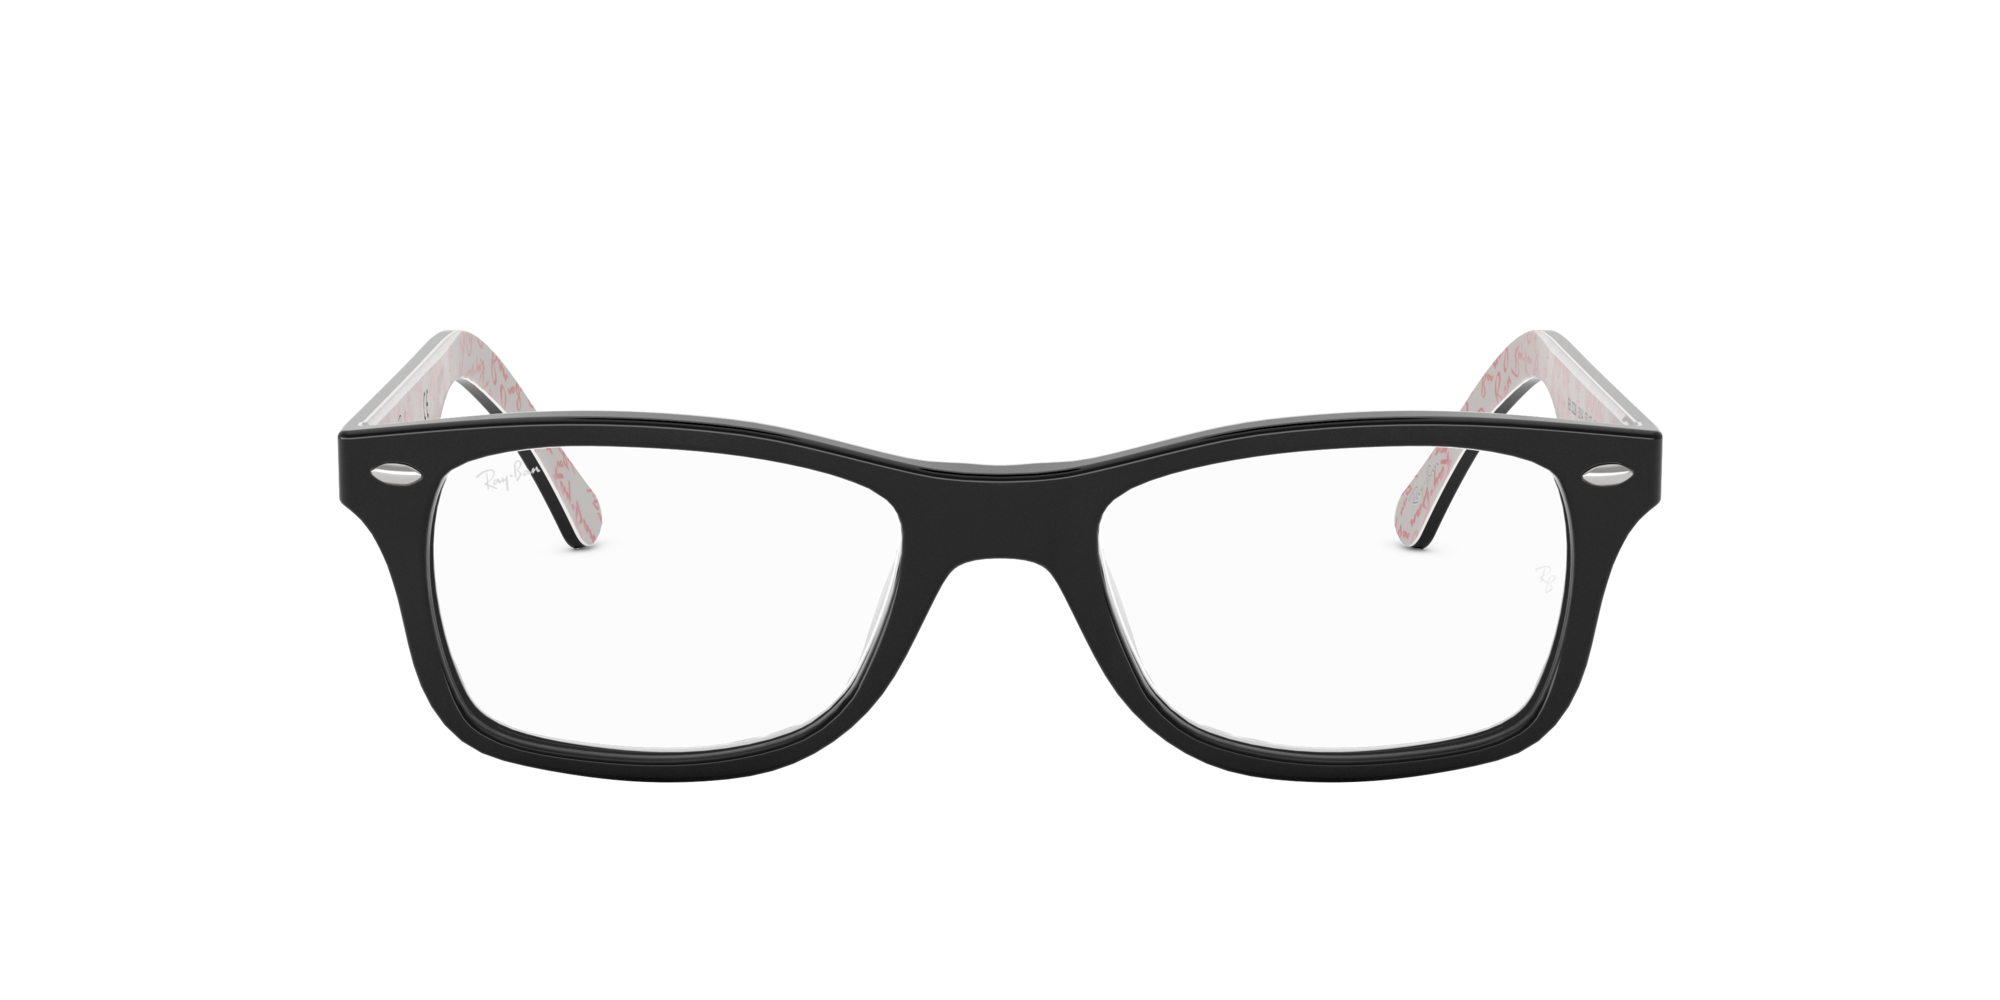 Ray Ban 0rx5228 Glasses In Black Target Optical